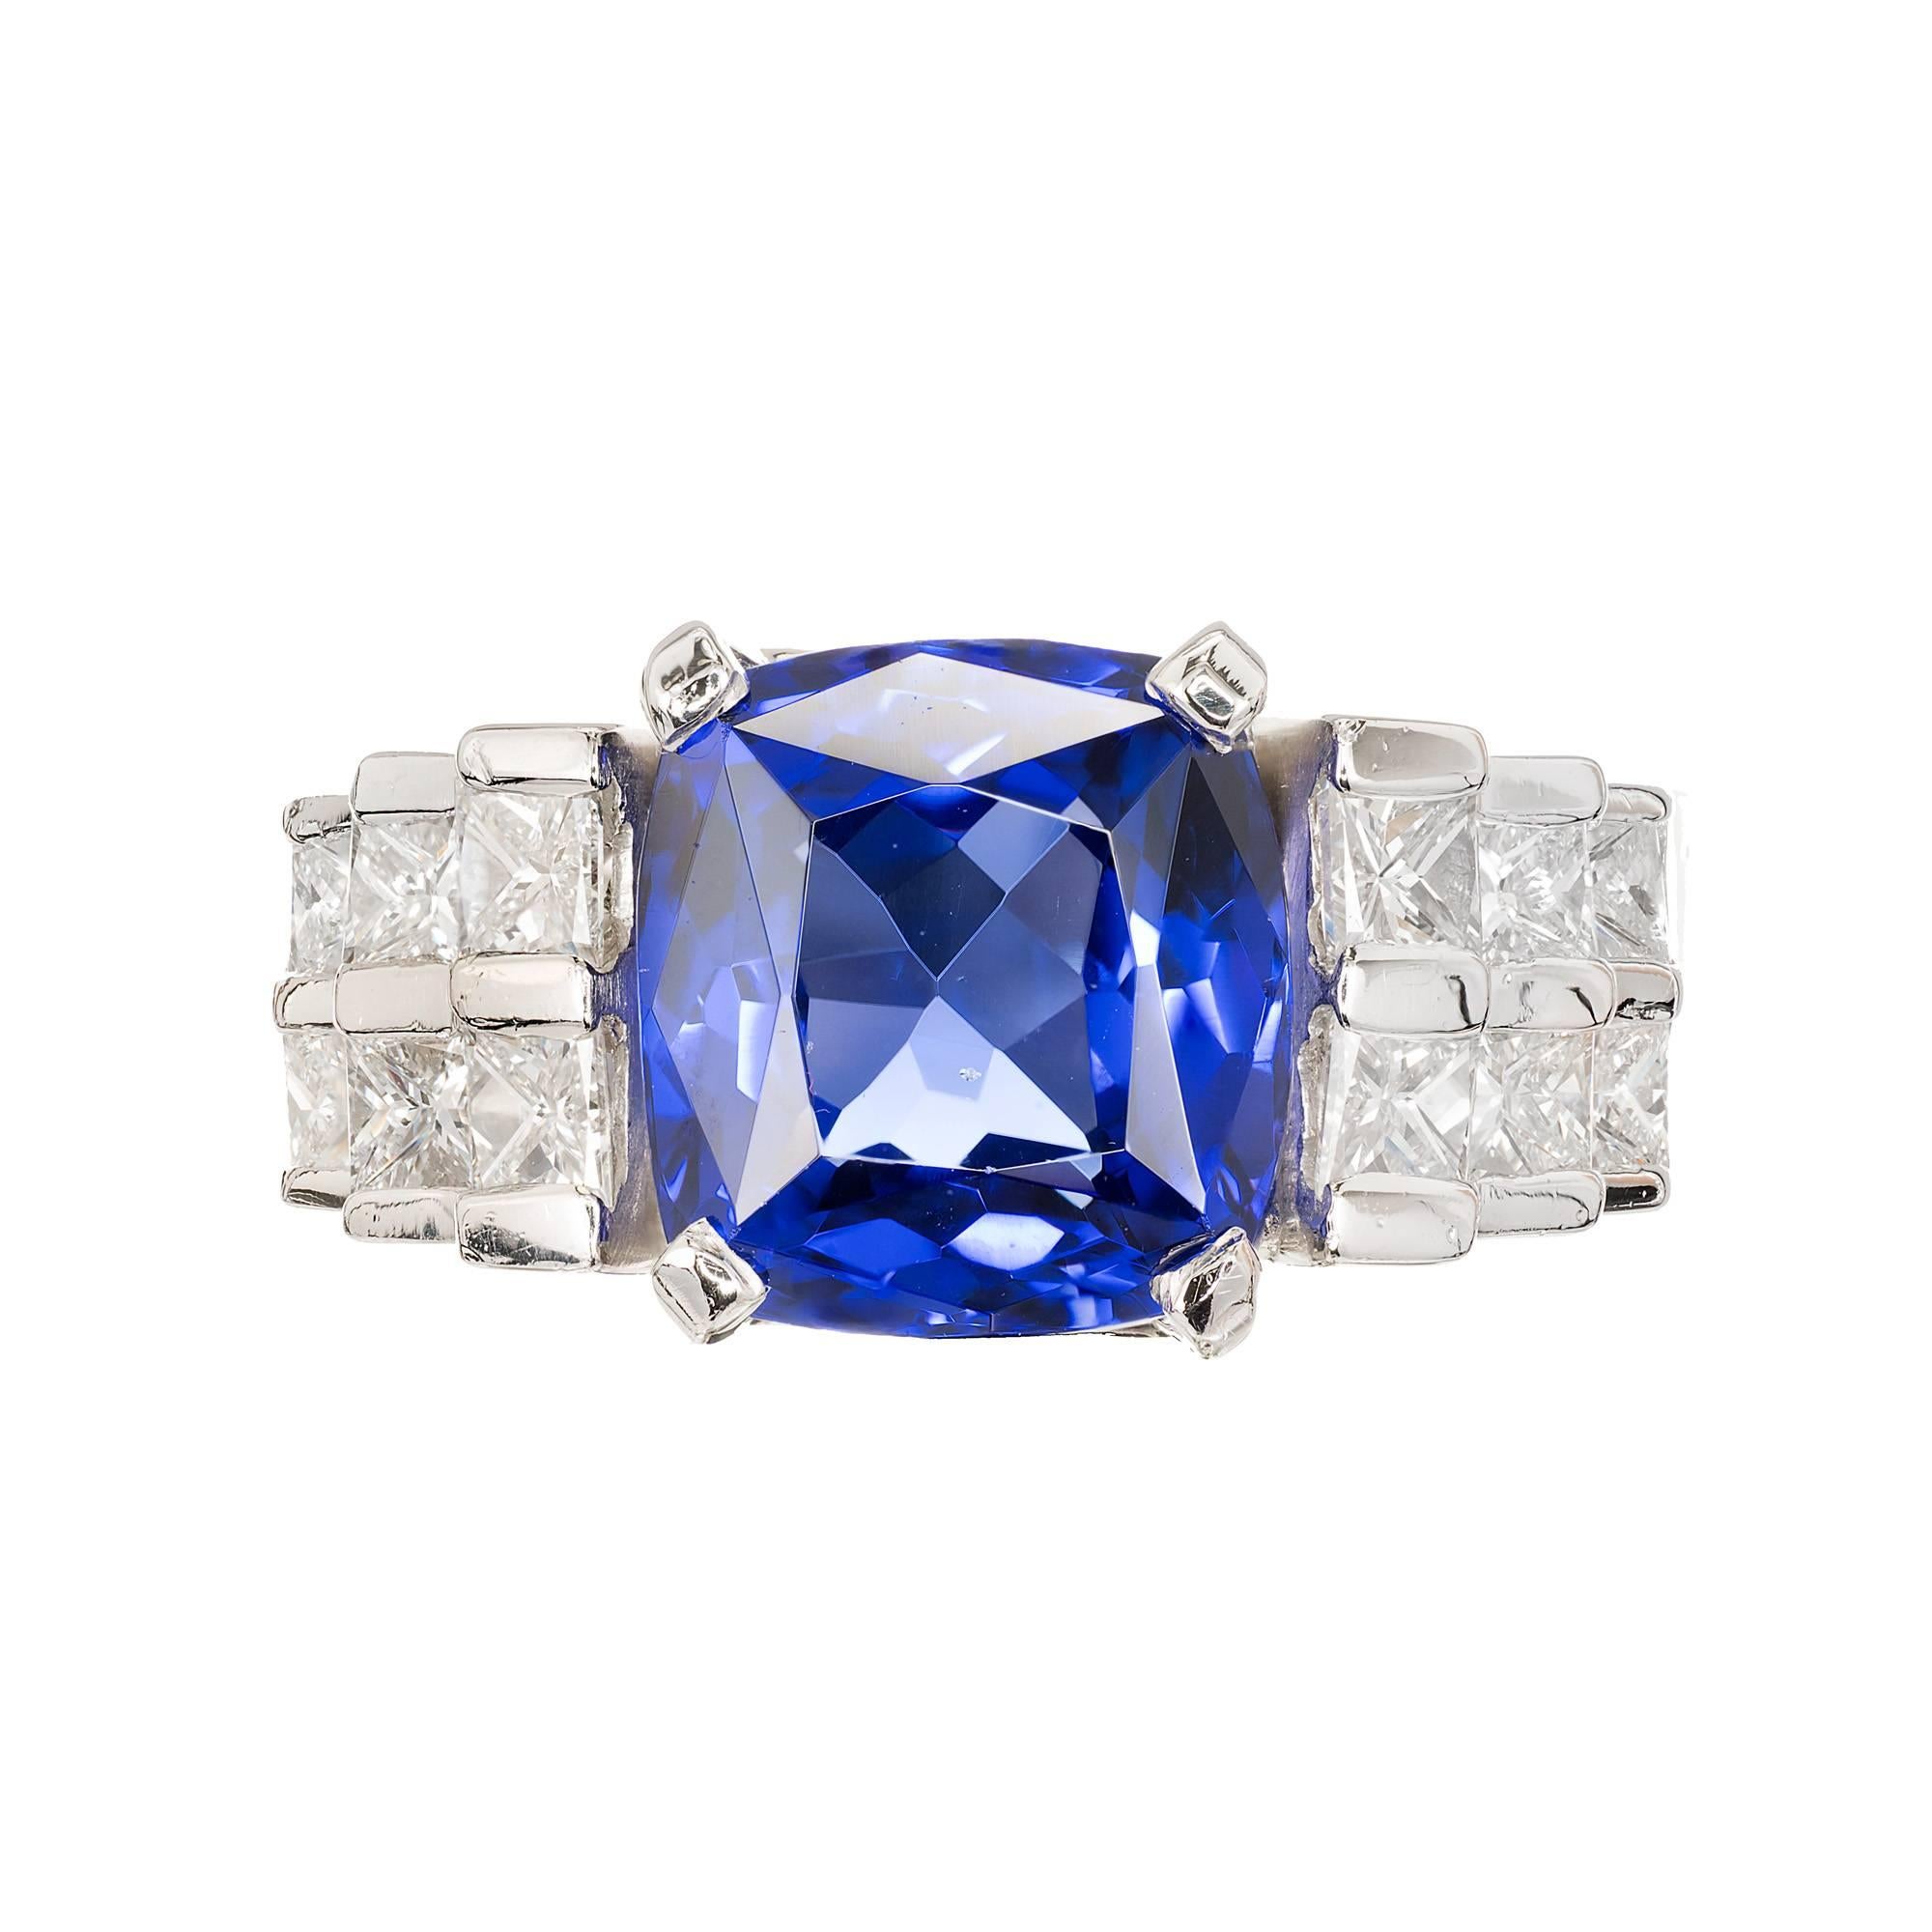 Vivid purple-blue tanzanite with princess cut accent diamonds. Heavy solid platinum engagement setting made just for this stone. 

1 cushion cut Tanzanite 6.38cts.
12 princess cut diamonds 1.50cts, F, VS1.
Size 8 ½ and sizable.
Stamped